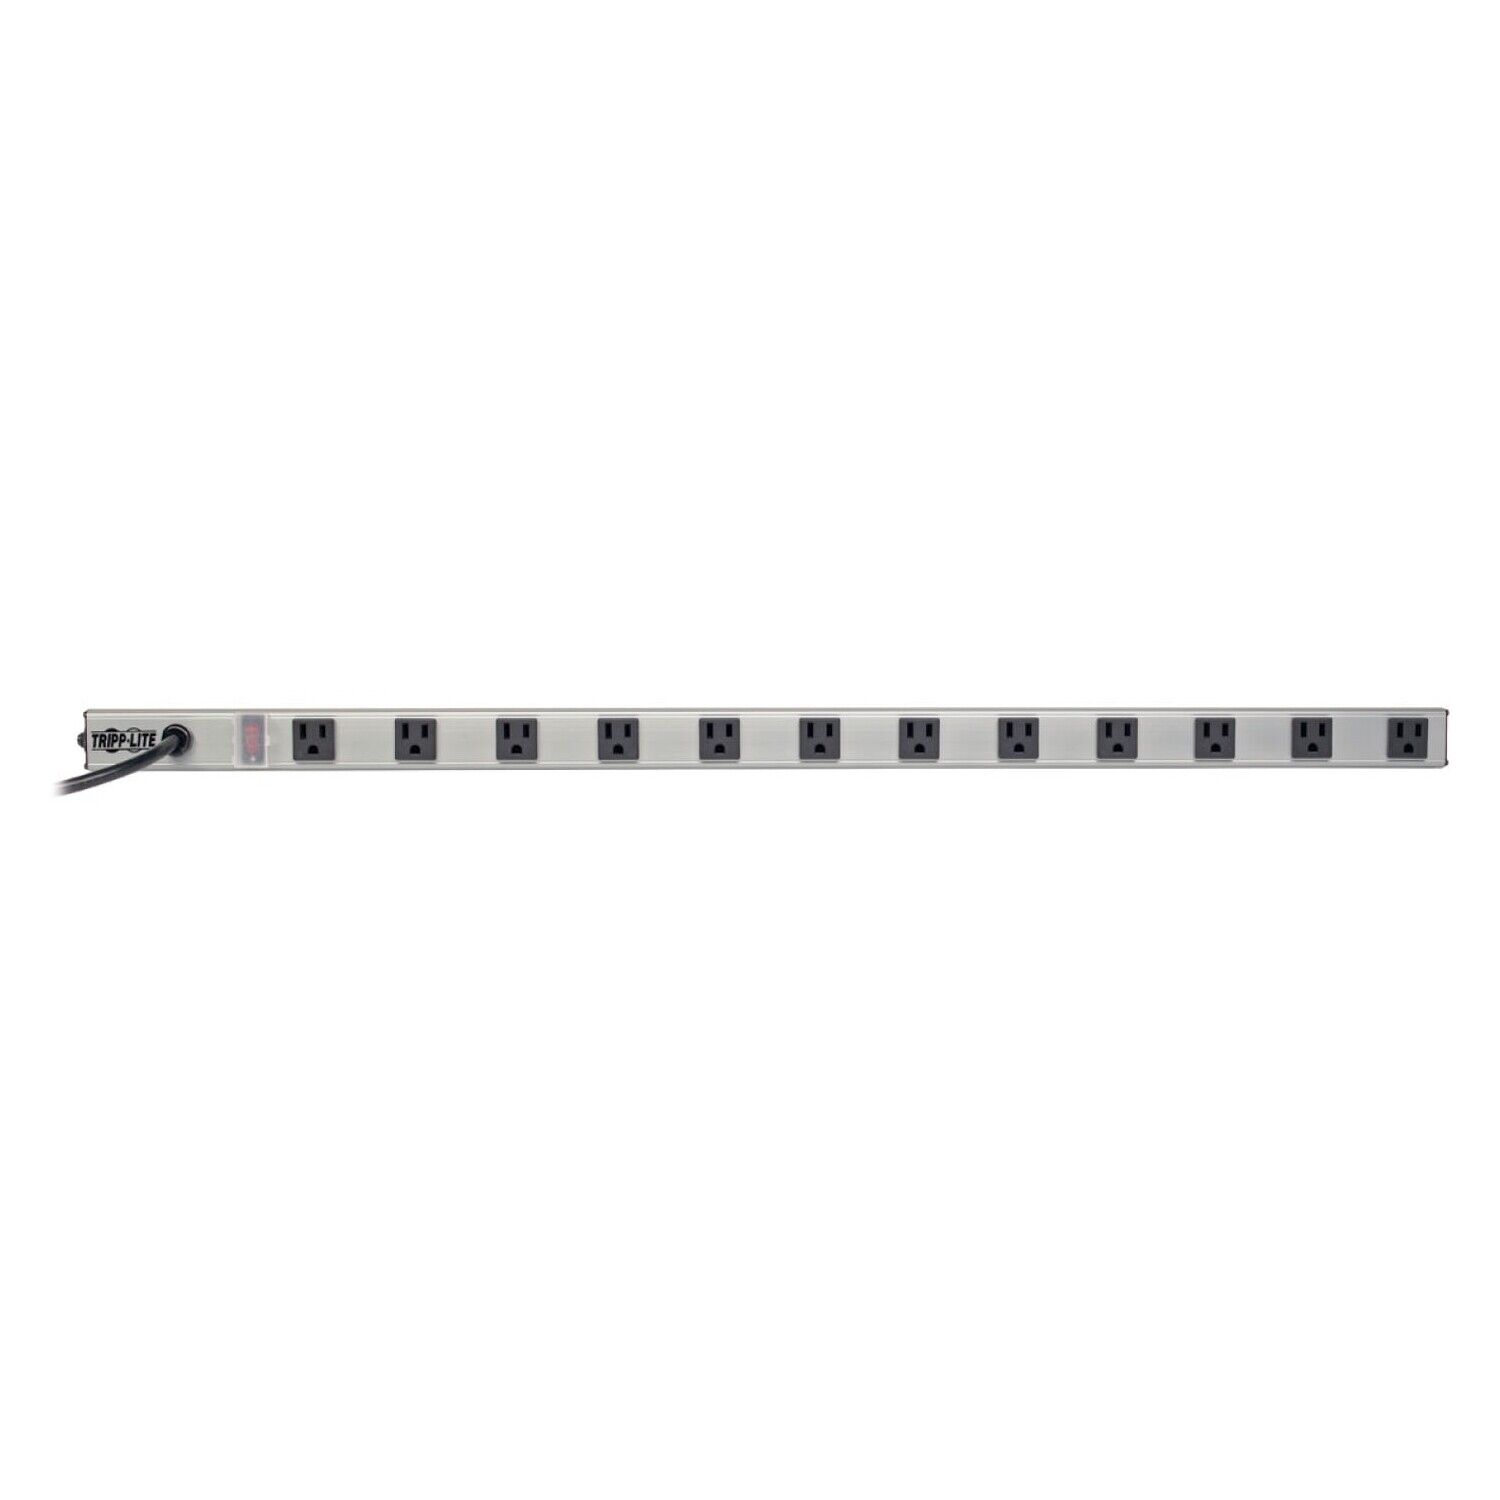 Tripp Lite 12 Right Angle Outlet Bench & Cabinet Power Strip, 36 in. Length,